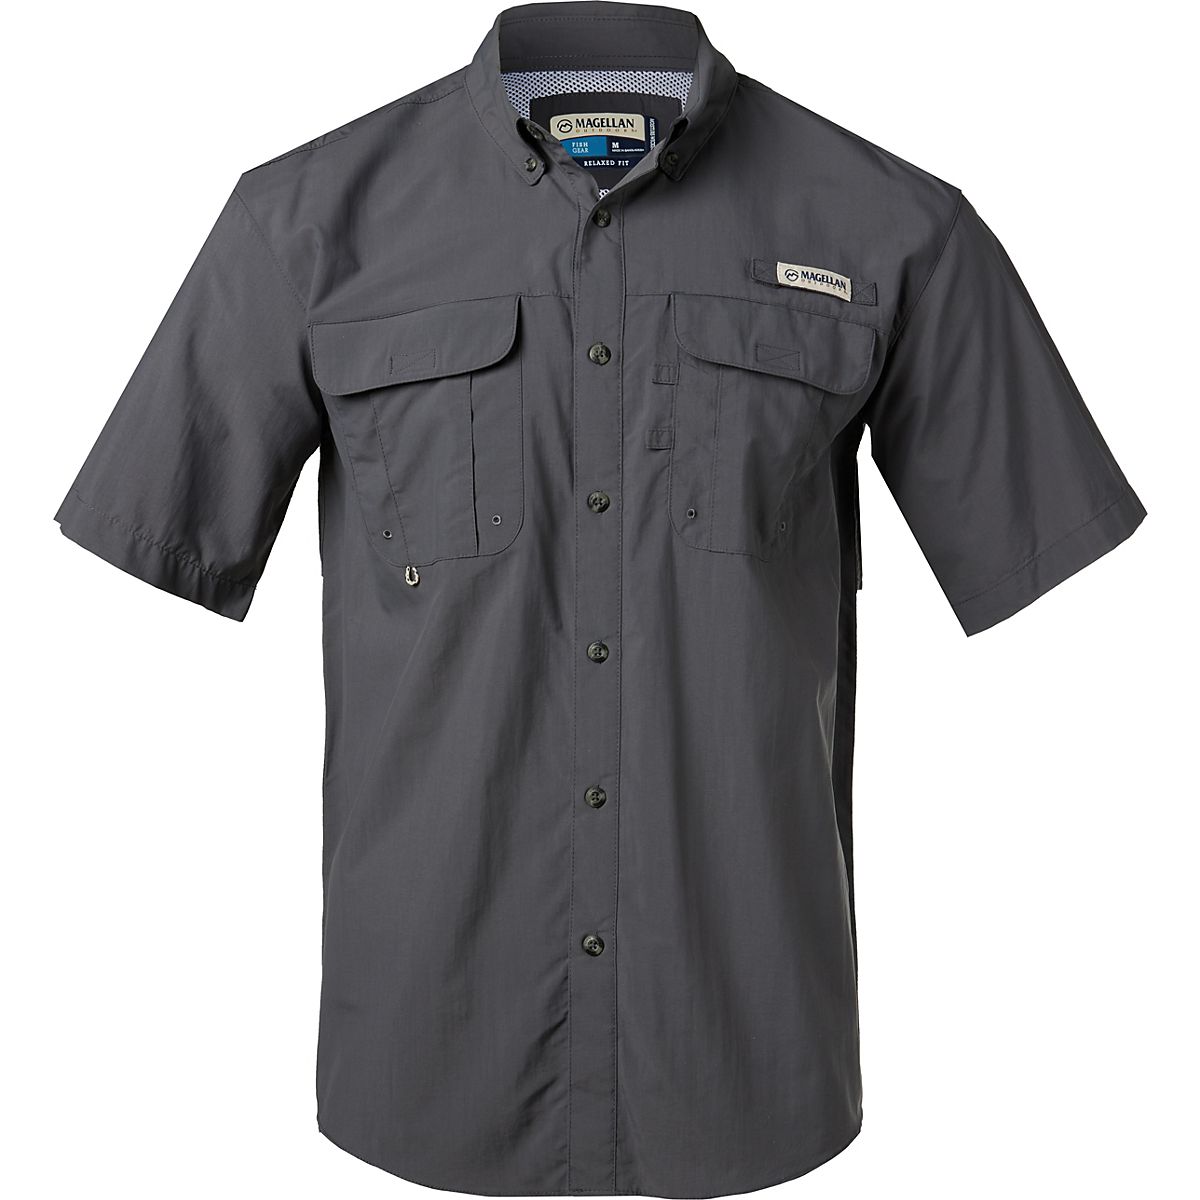 Magellan Outdoors Mens Lrg Relaxed Fit Ventilated Fishing Stain